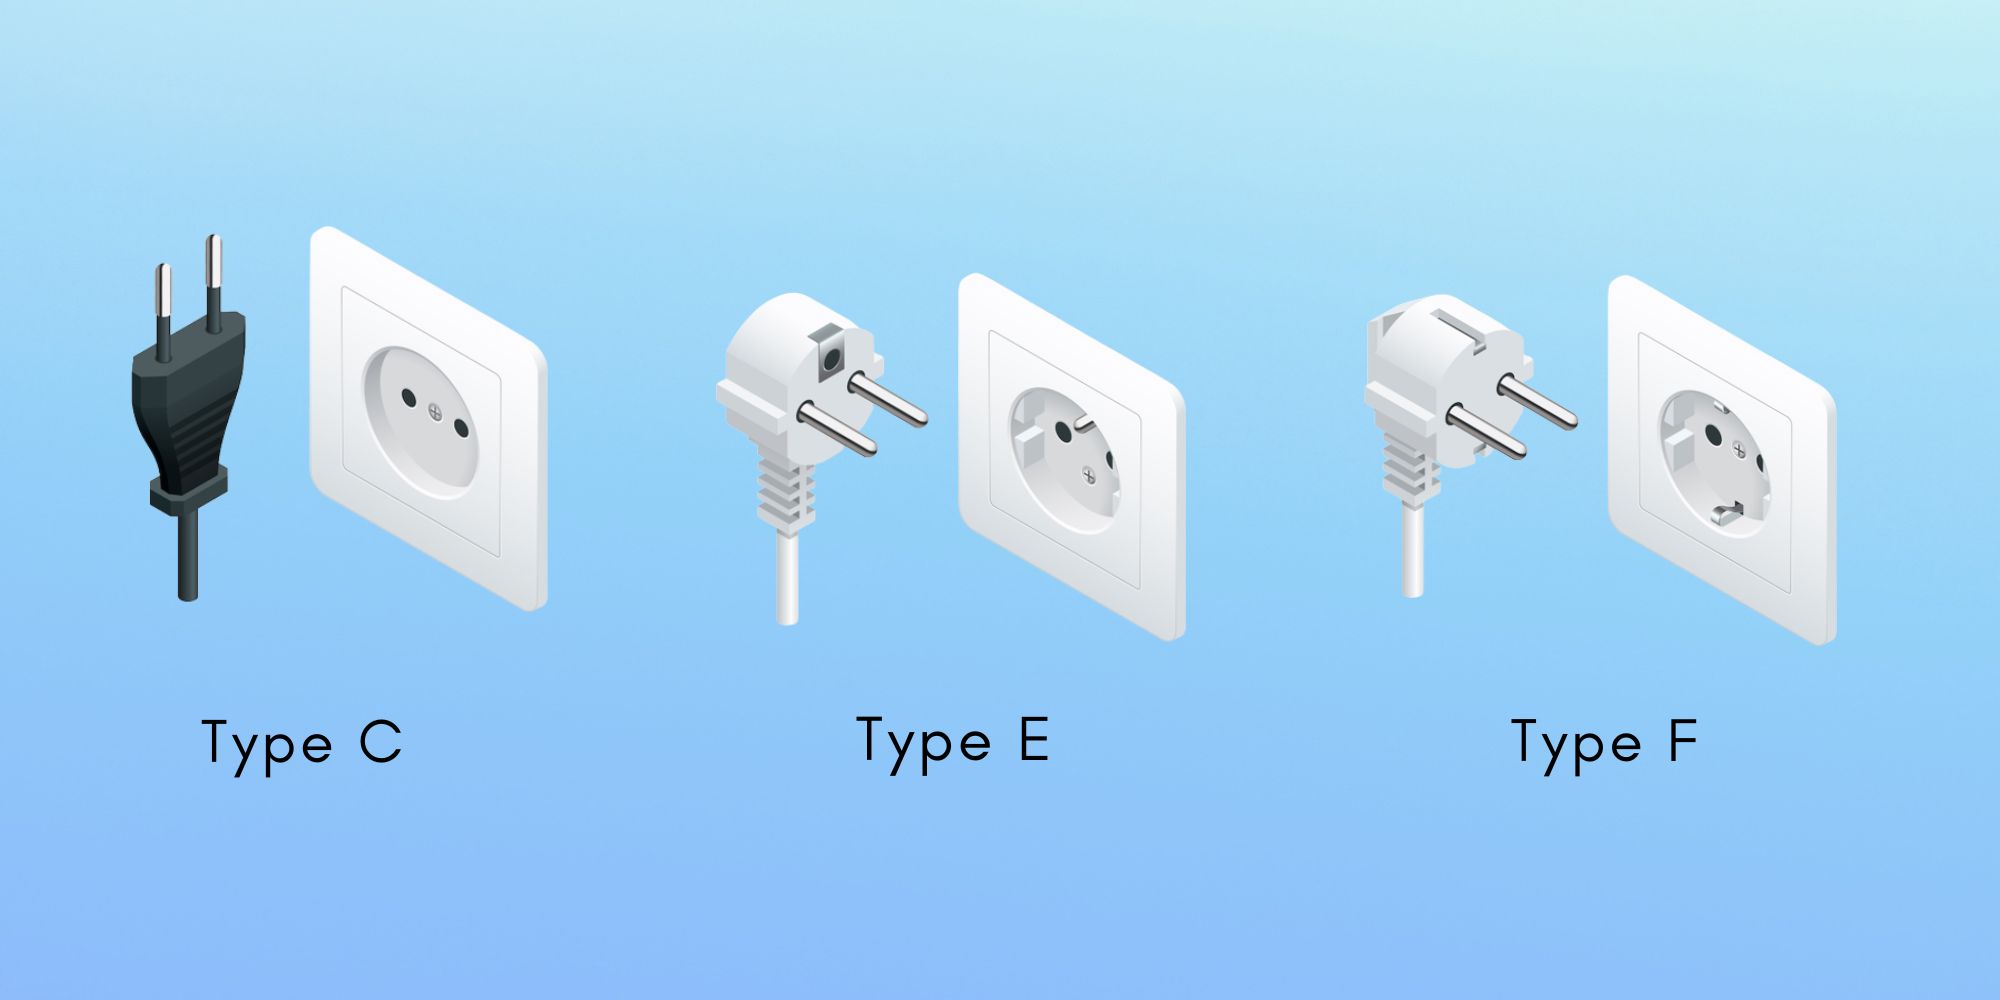 Mauritania Power Plugs and Sockets: Type C, Type E, and Type F
